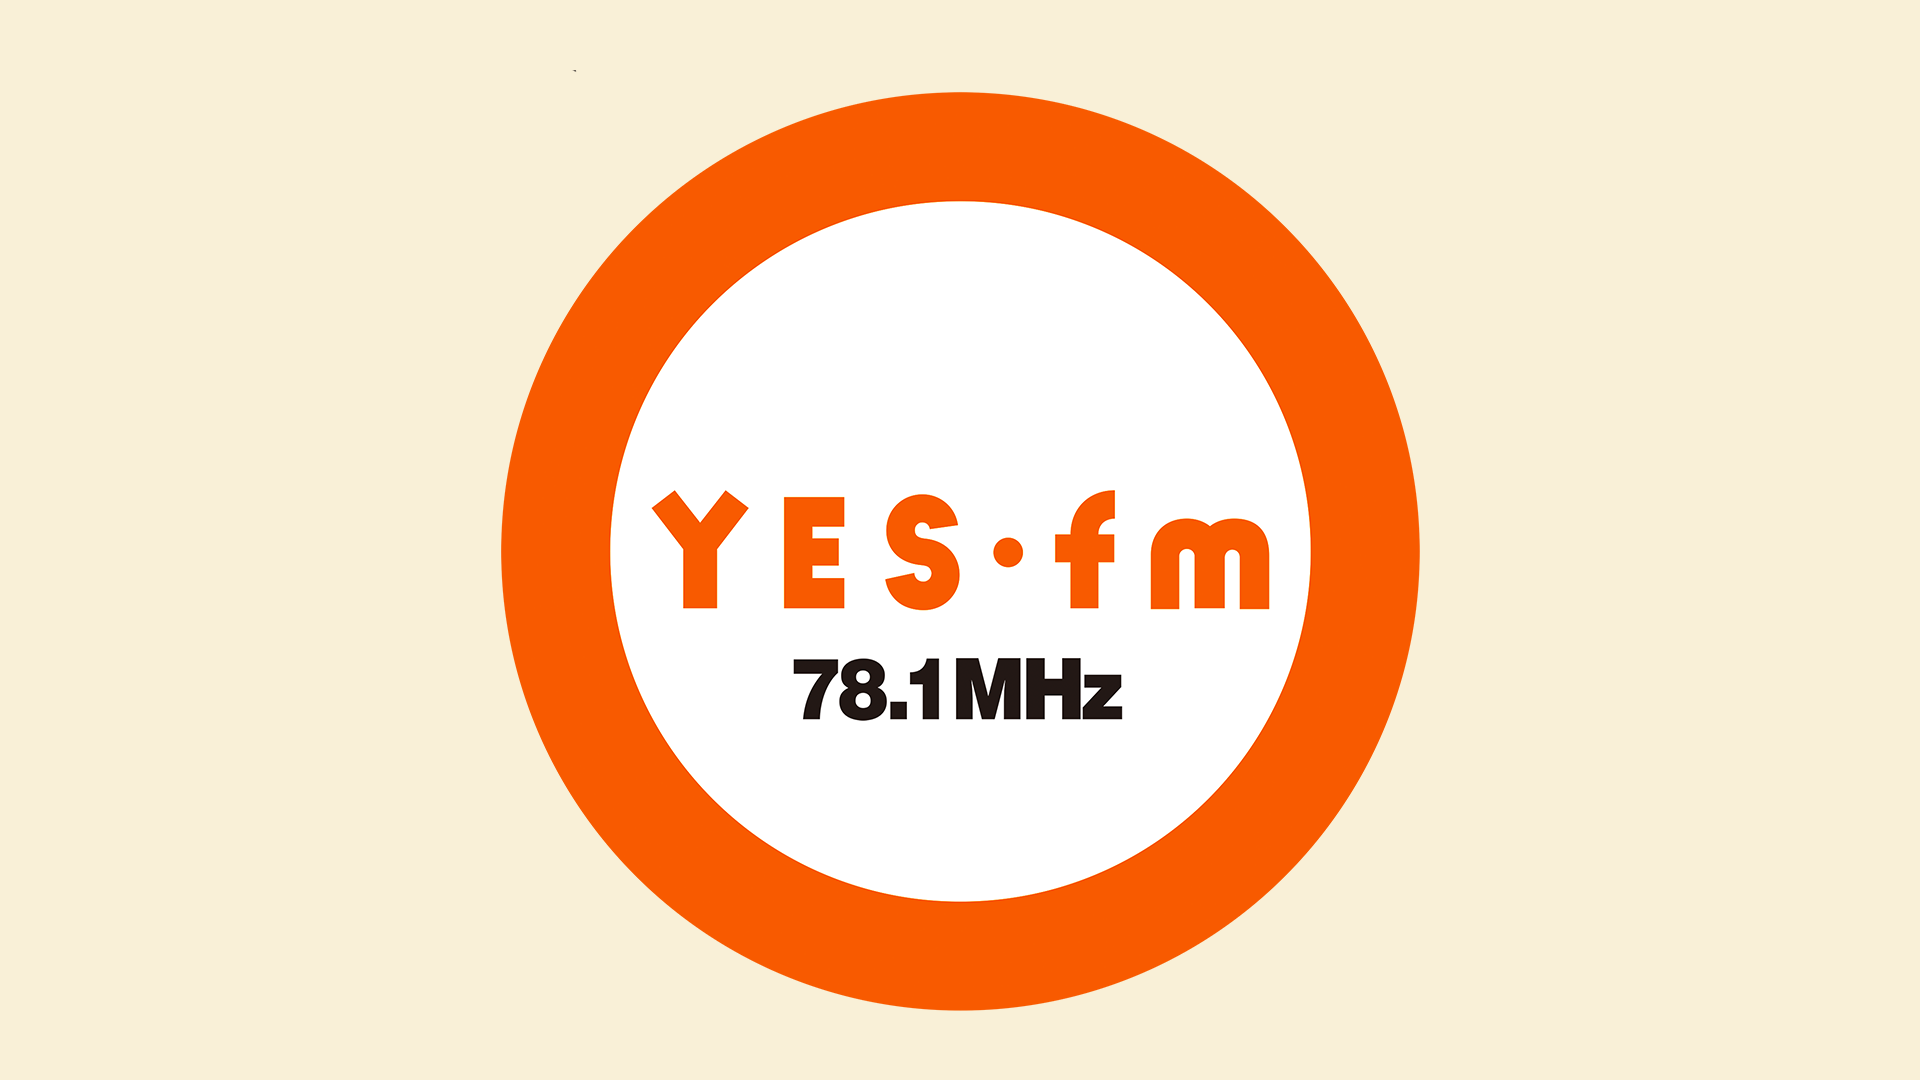 YES-fm 78.1MHz